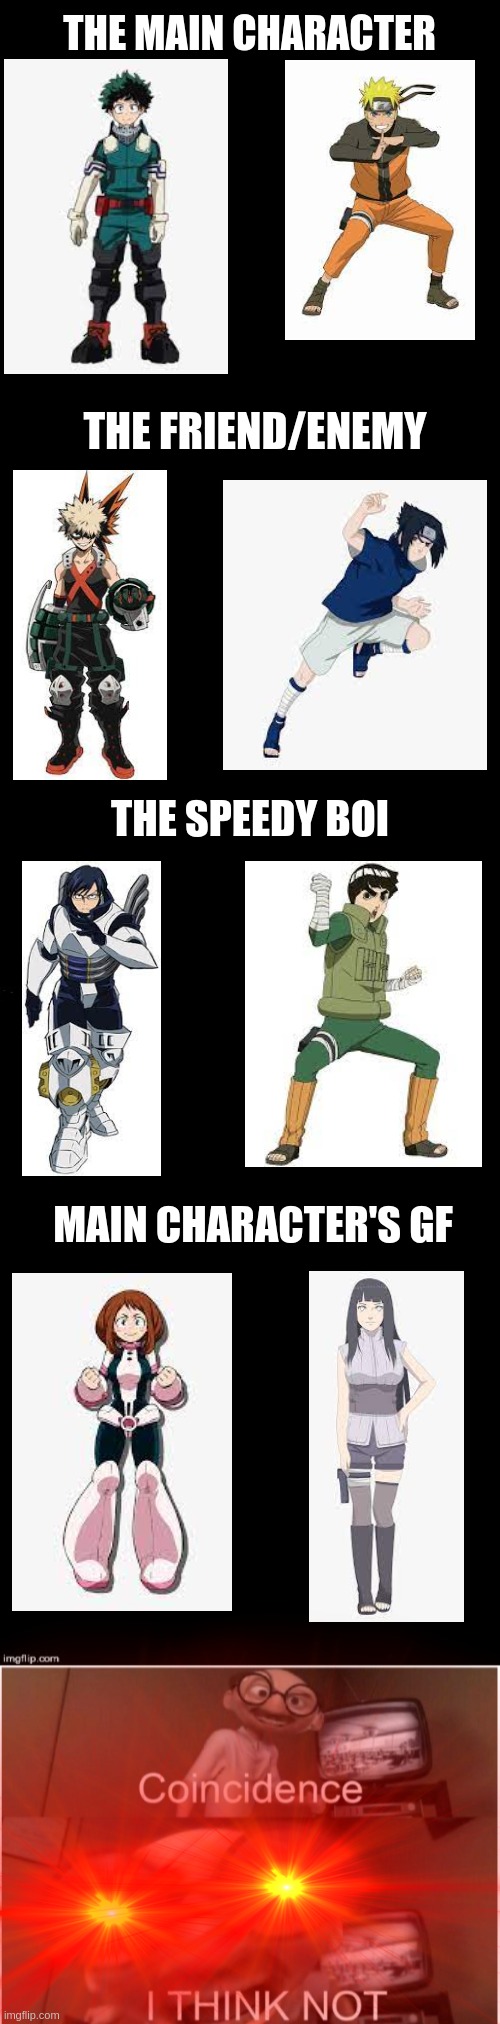 How is this happening 0-0 | THE MAIN CHARACTER; THE FRIEND/ENEMY; THE SPEEDY BOI; MAIN CHARACTER'S GF | image tagged in coincidence i think not,ulternate universe,mind blown,nuni,funny | made w/ Imgflip meme maker